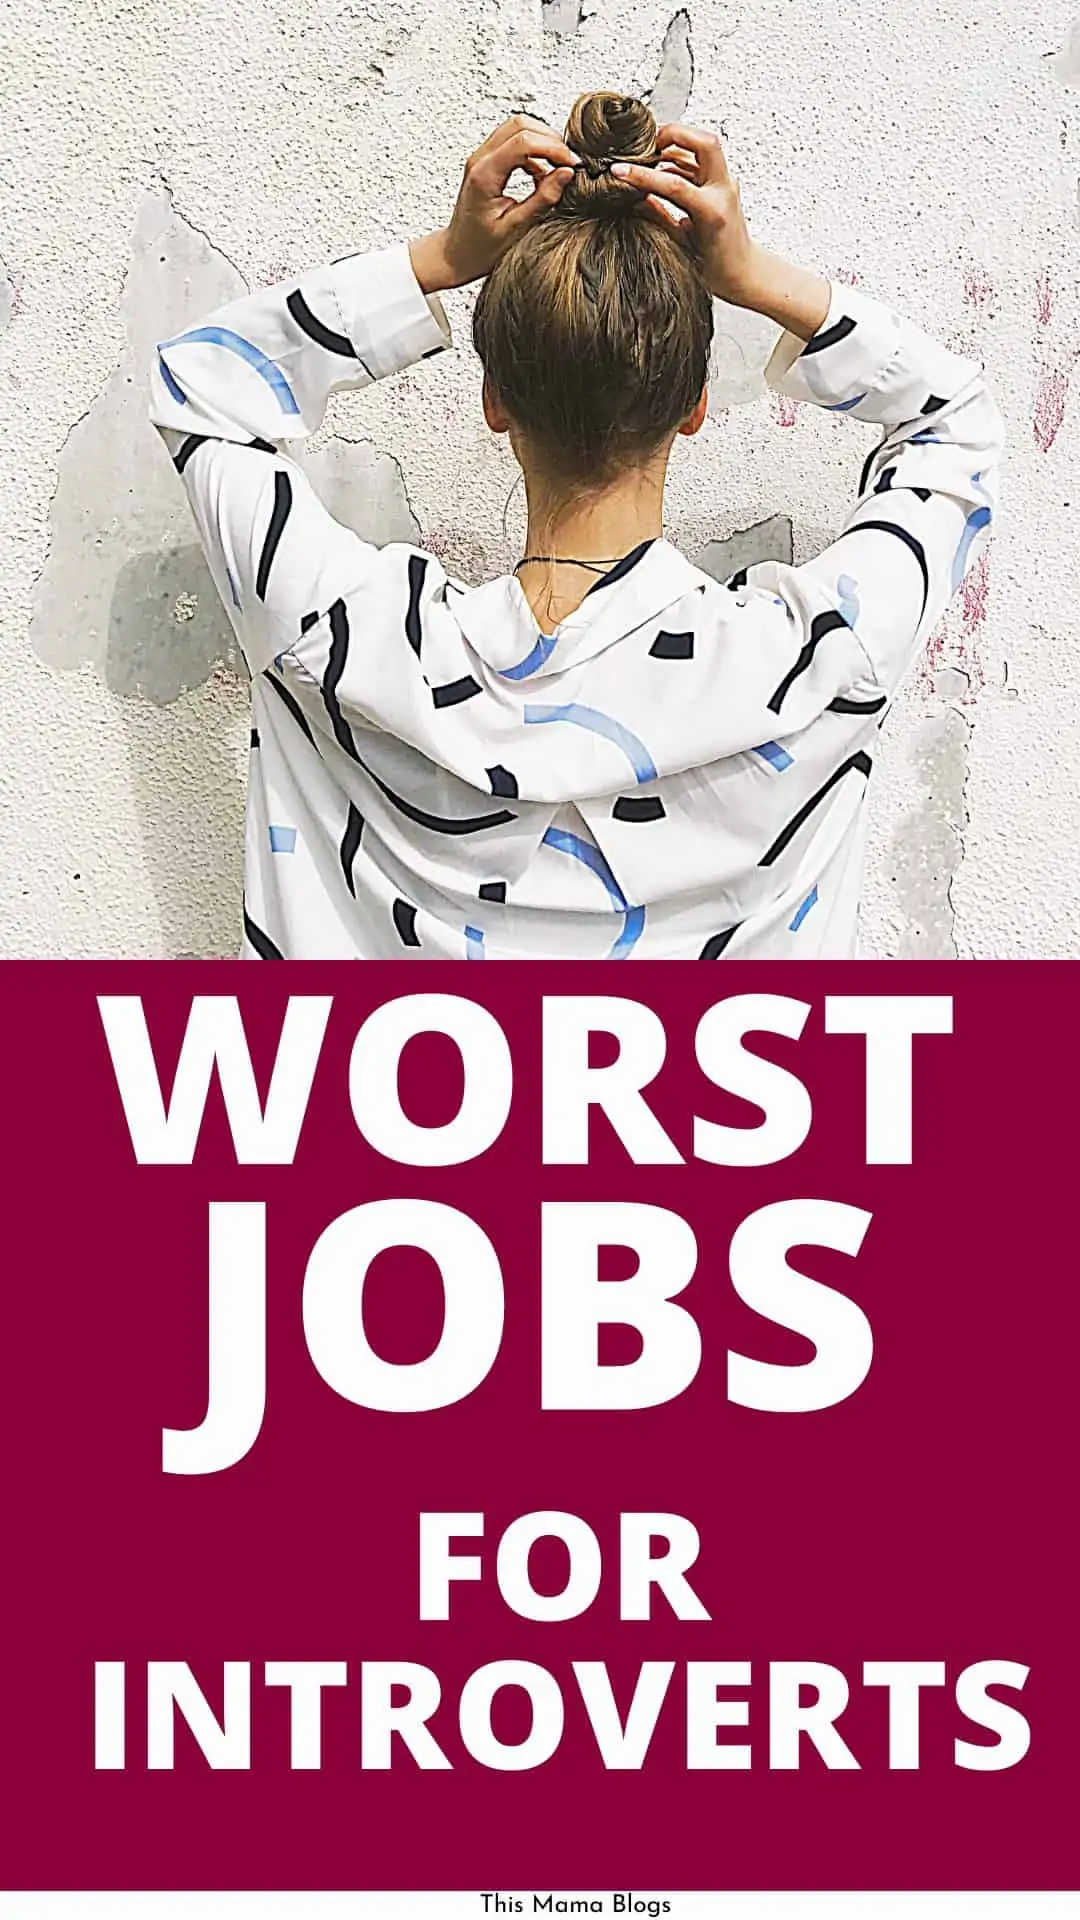 16 Worst Jobs for Introverts